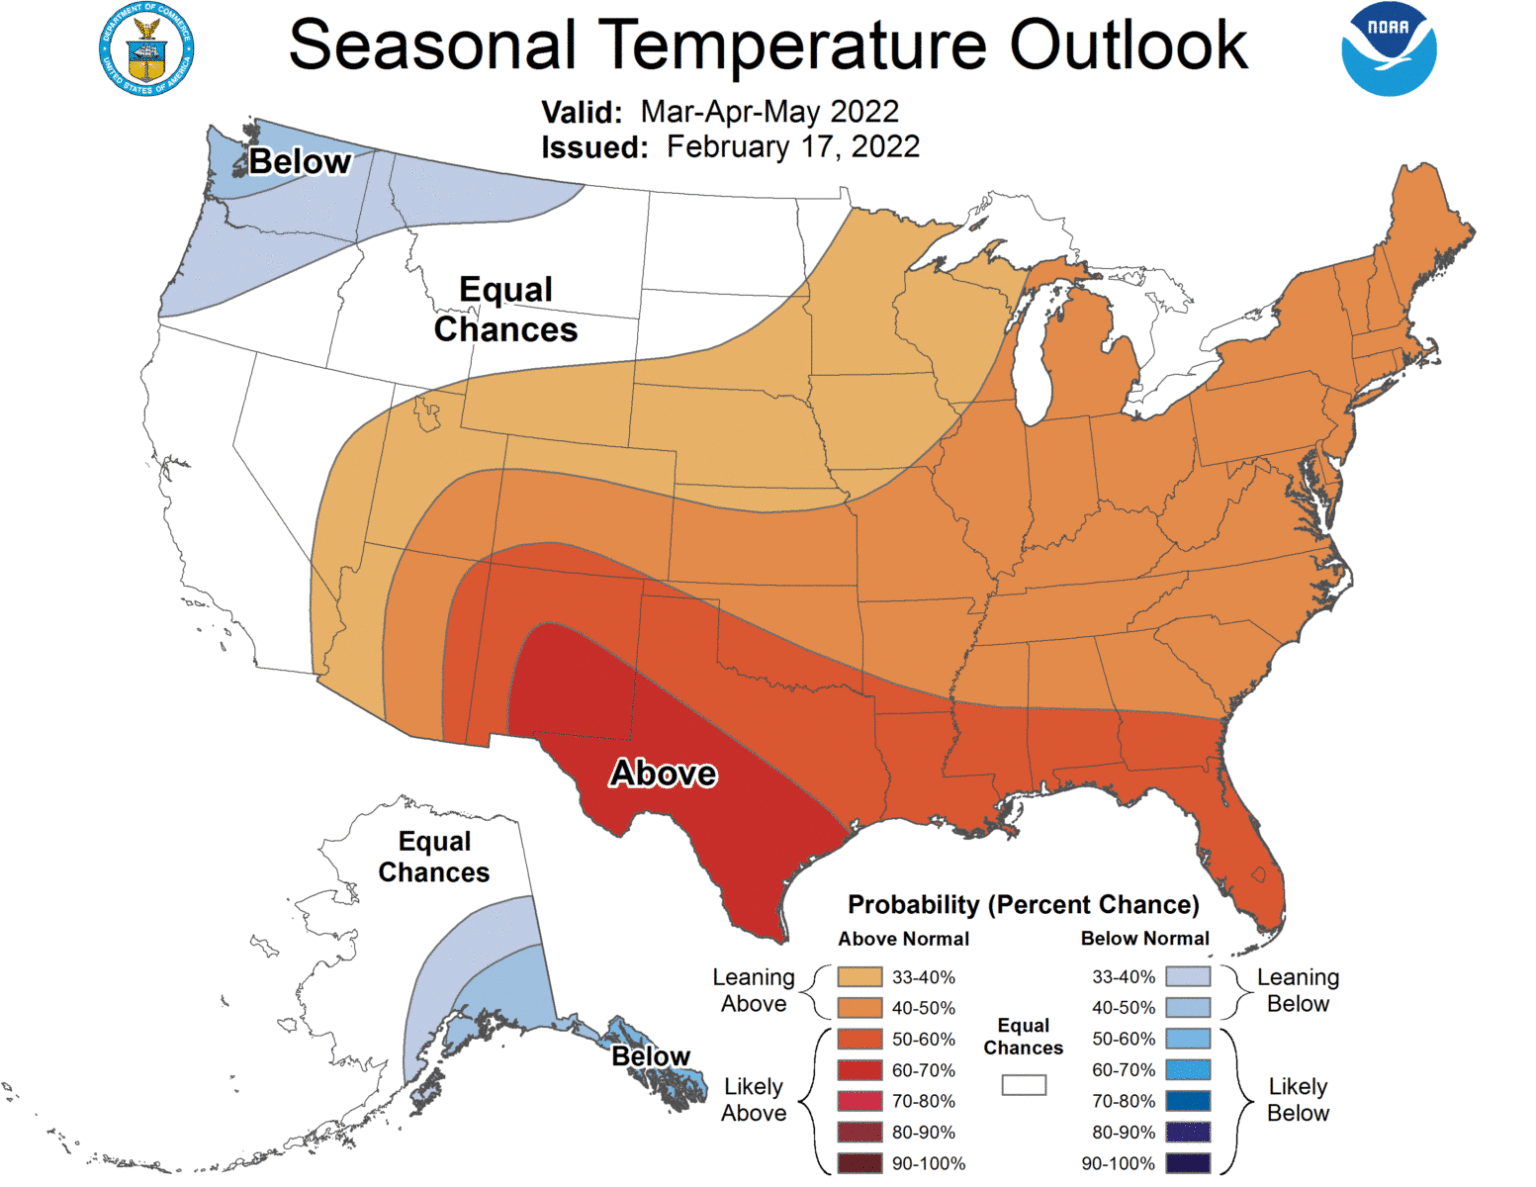 On Feb. 17, NOAA's Climate Prediction Center released its latest three-month climate outlook, which includes the seasonal temperature forecast for the U.S. The map above represents the probability that temperatures will be above or below normal by location.